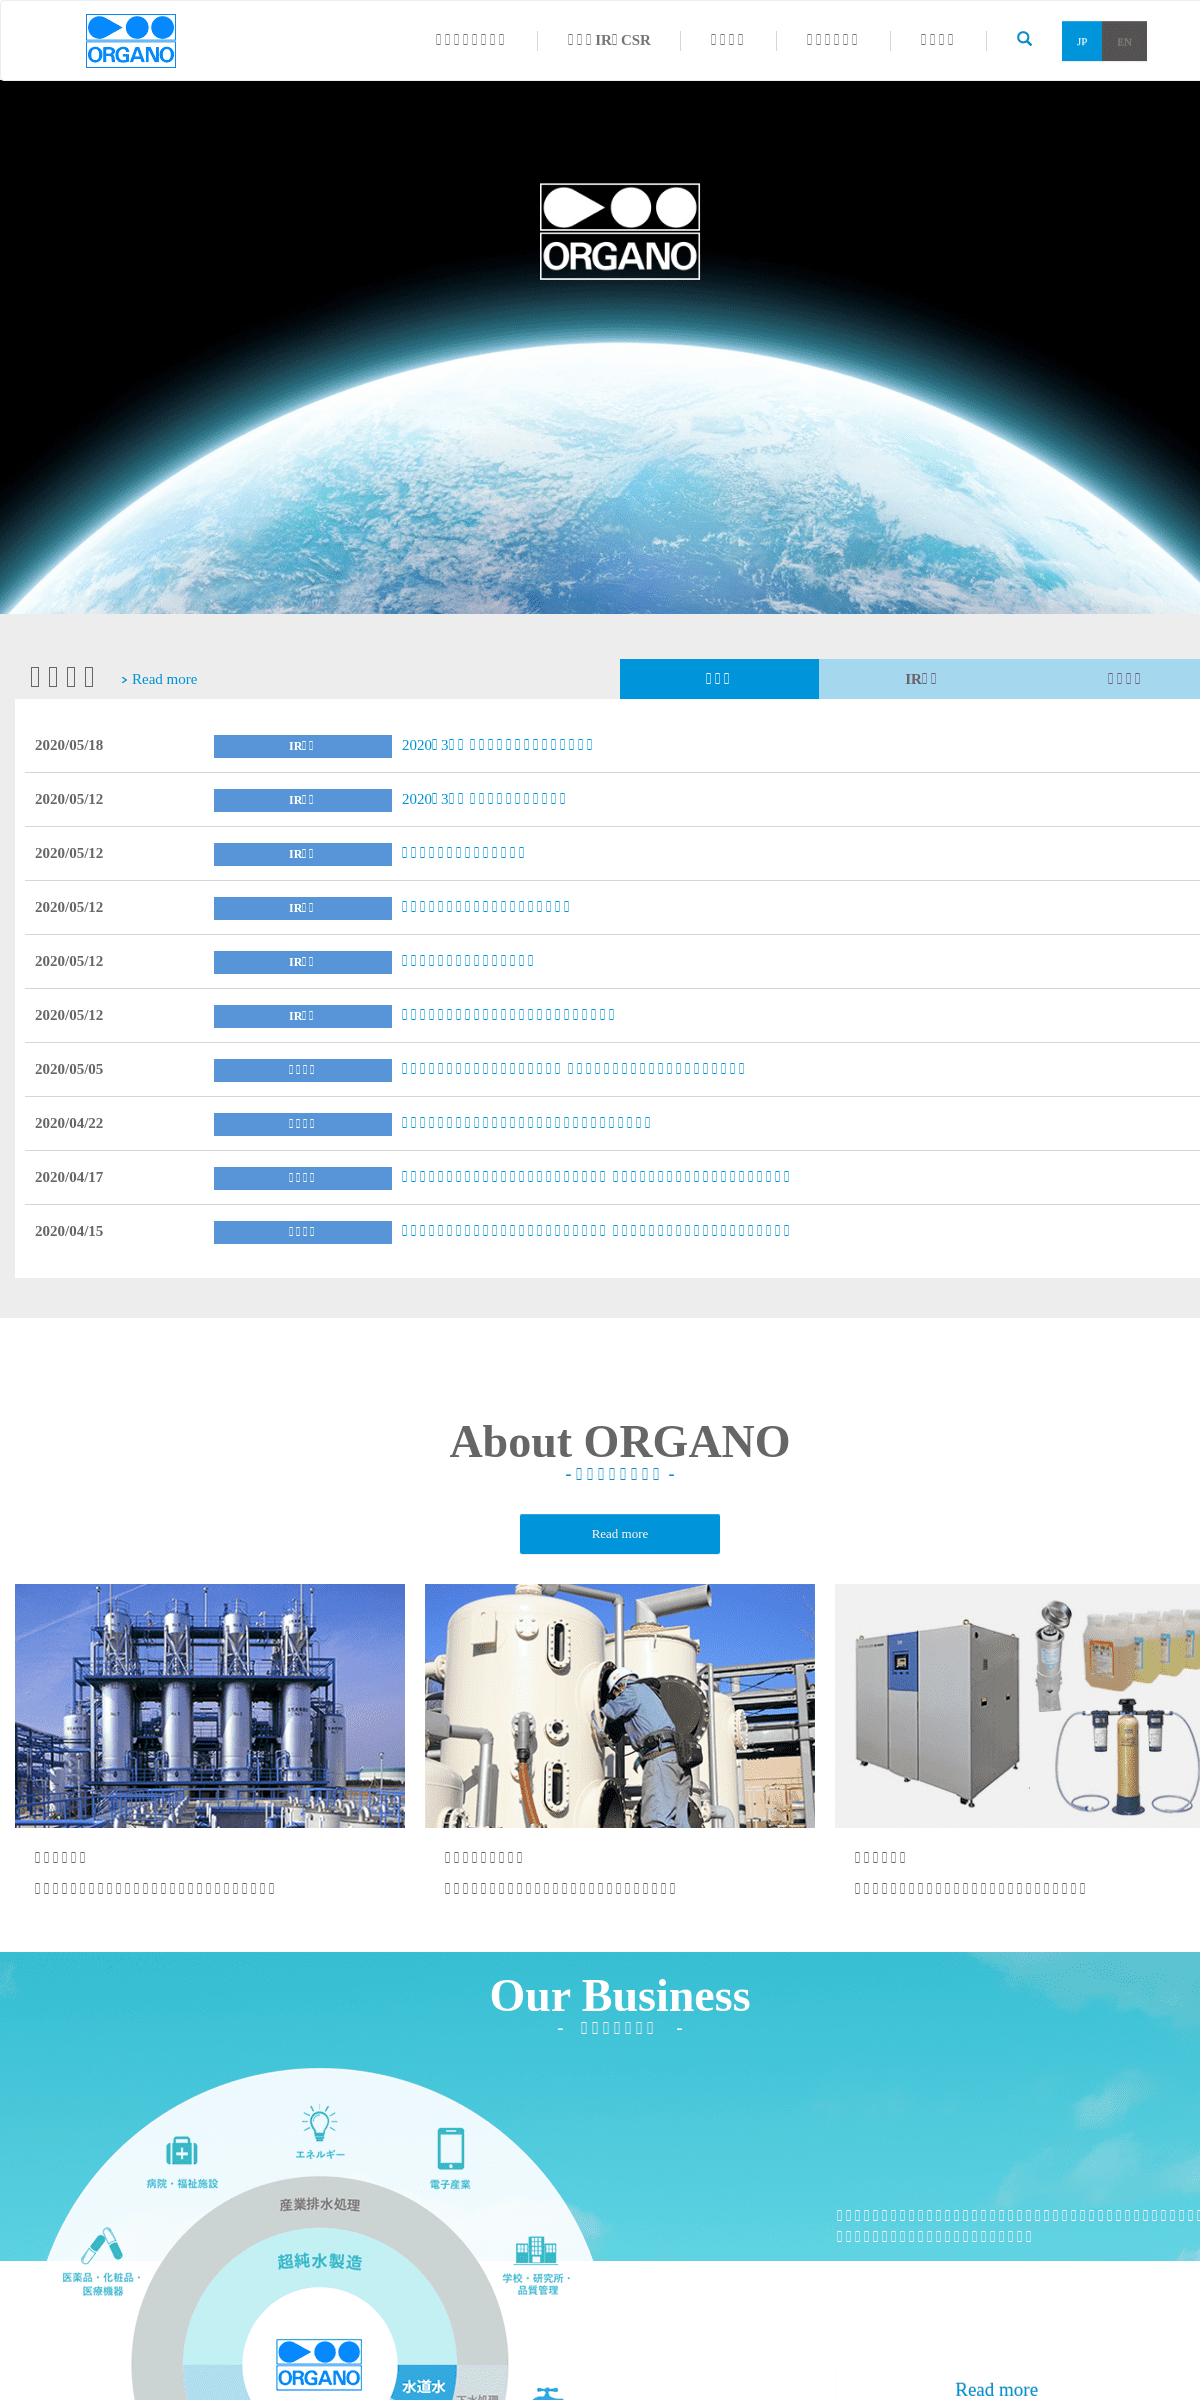 A complete backup of organo.co.jp